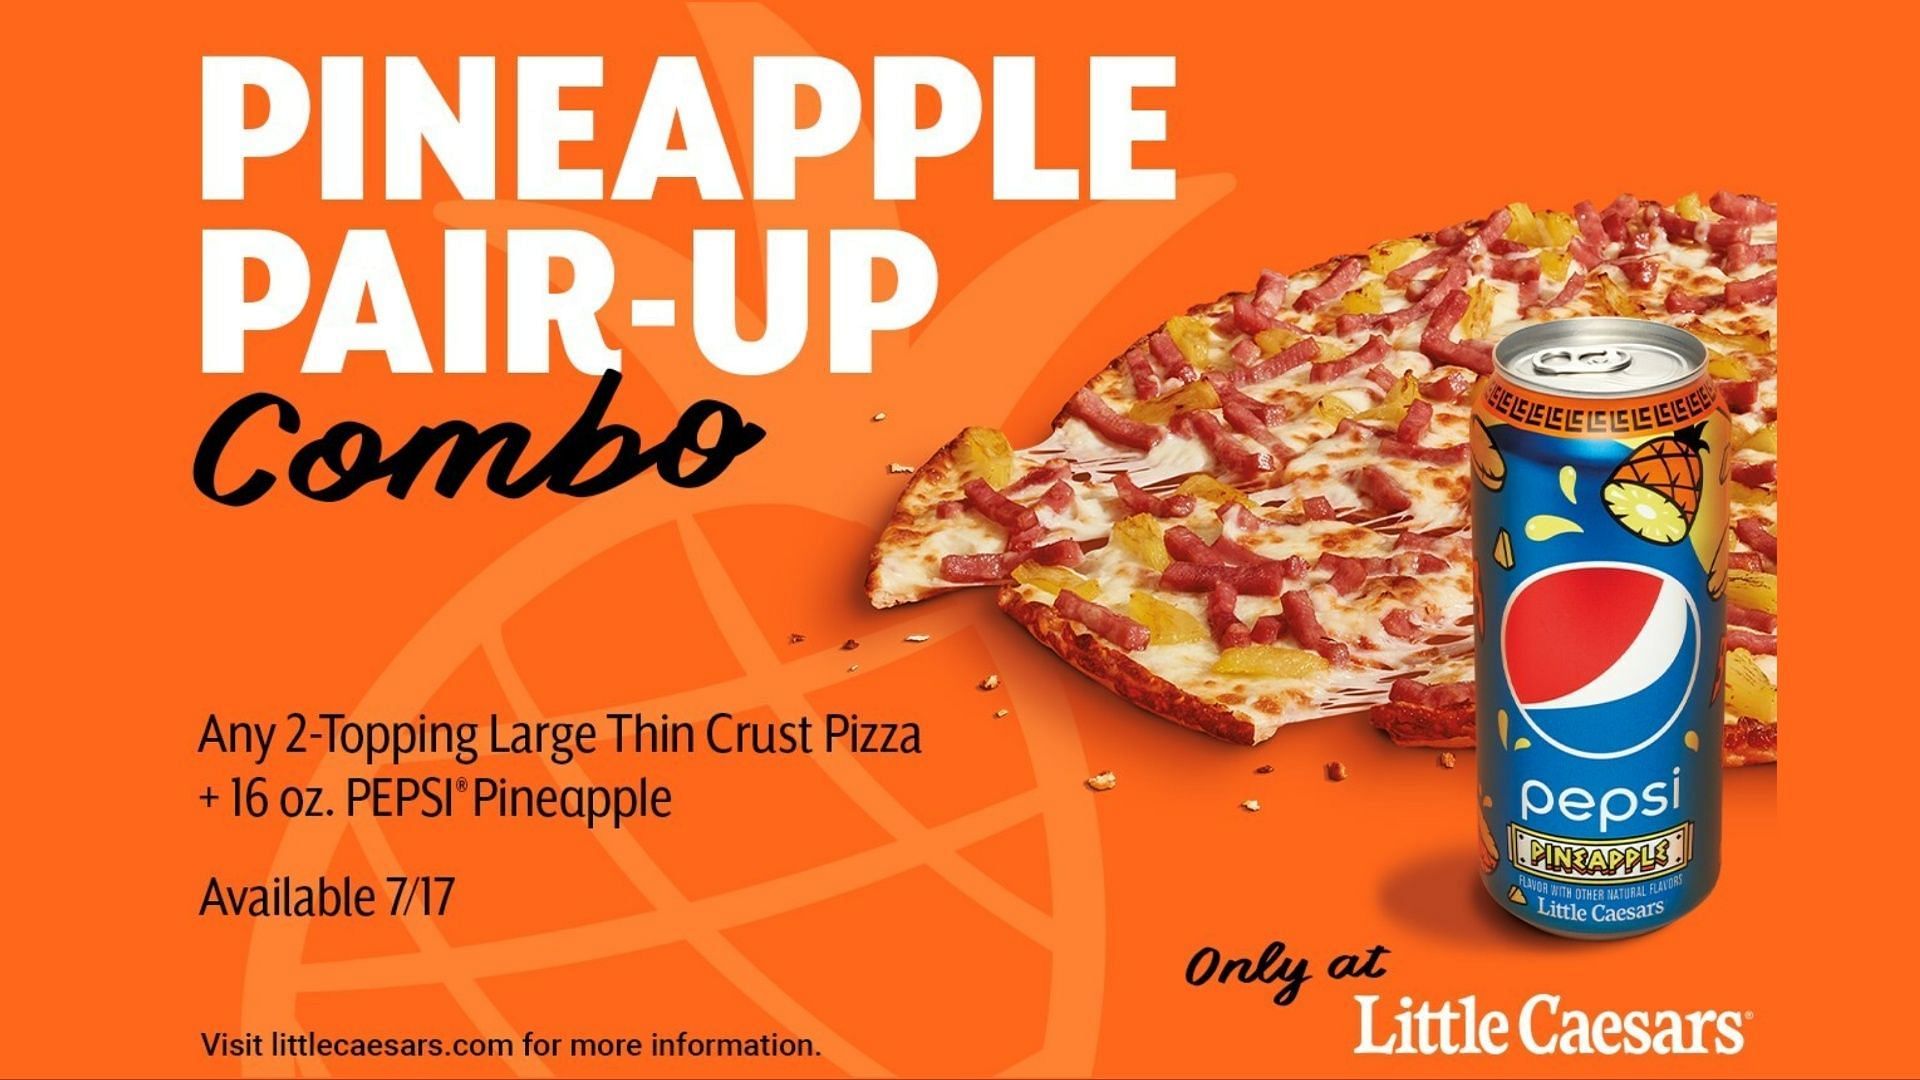 Pepsi and Little Caesars jointly introduce a new Pepsi Pineapple with the new Pineapple Pair-Up pizza combo (Image via Pepsi / Little Caesars)